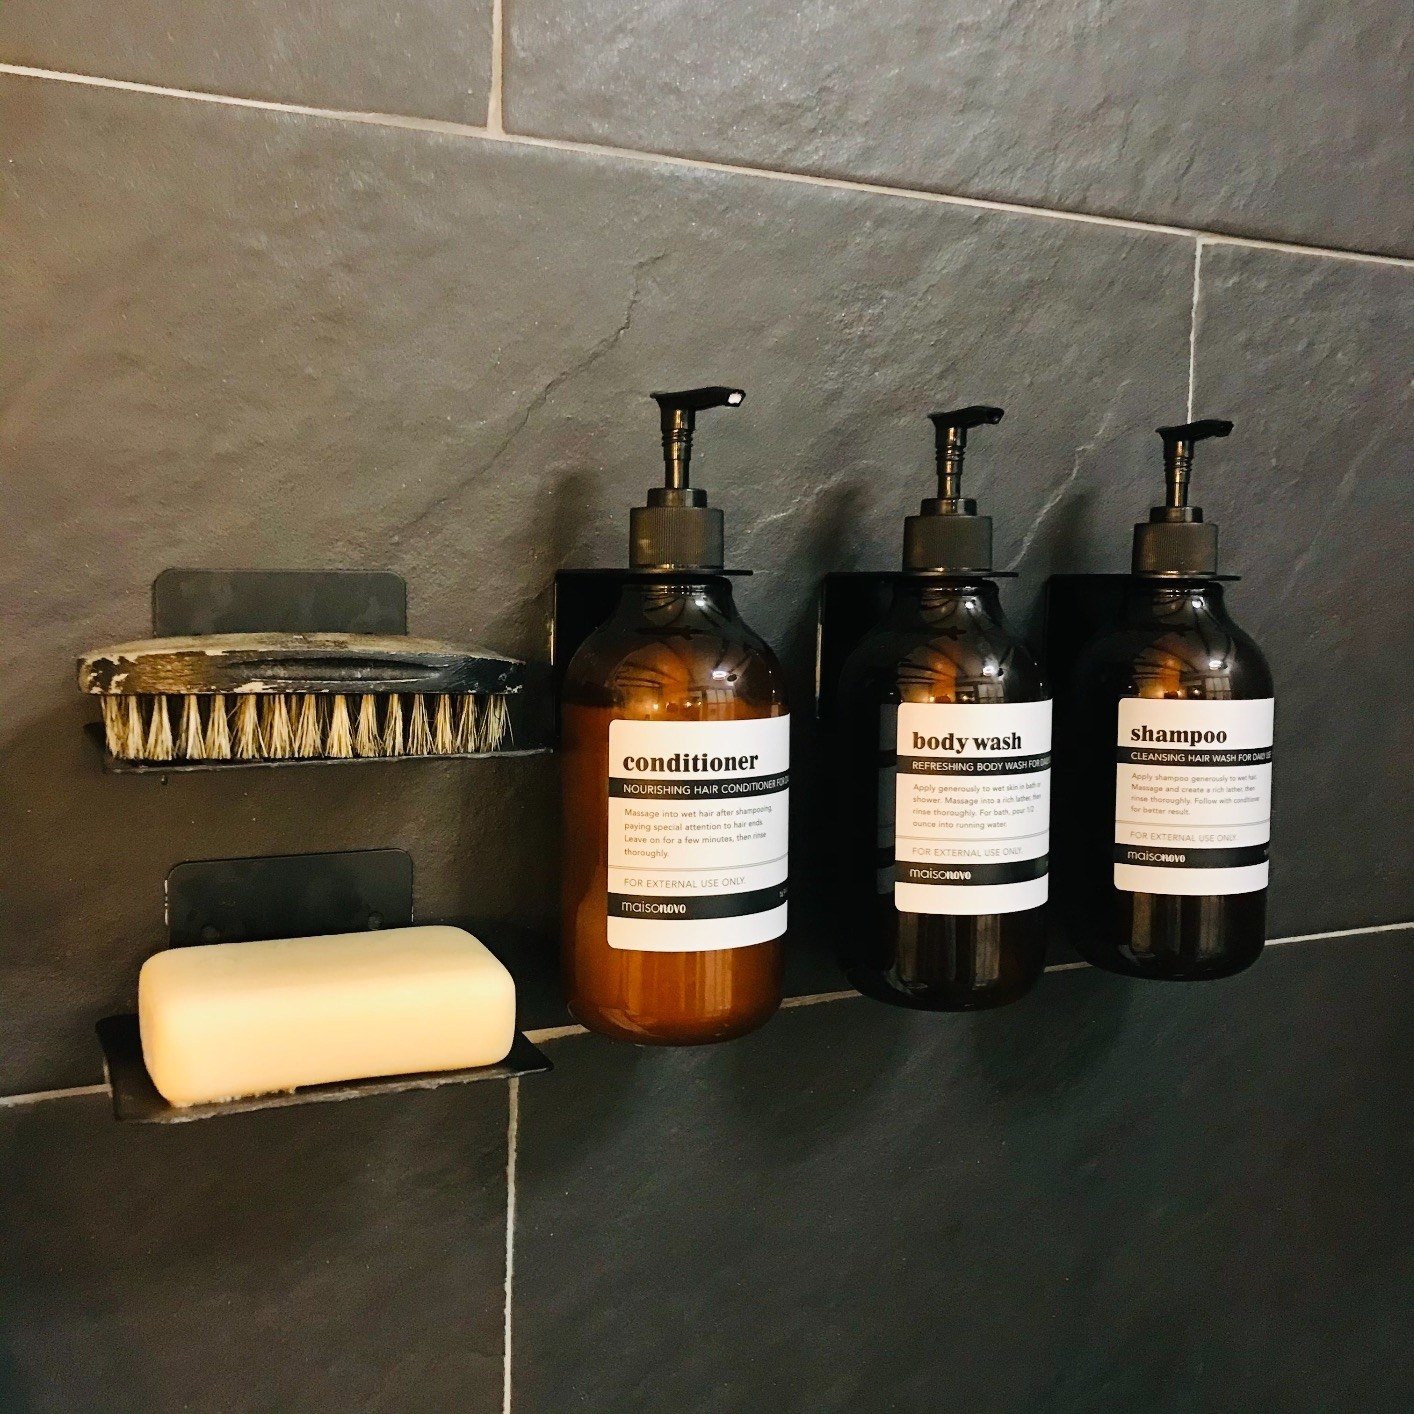 Reviewer&#x27;s shampoo, conditioner, and body wash bottles are shown on the wall of a shower